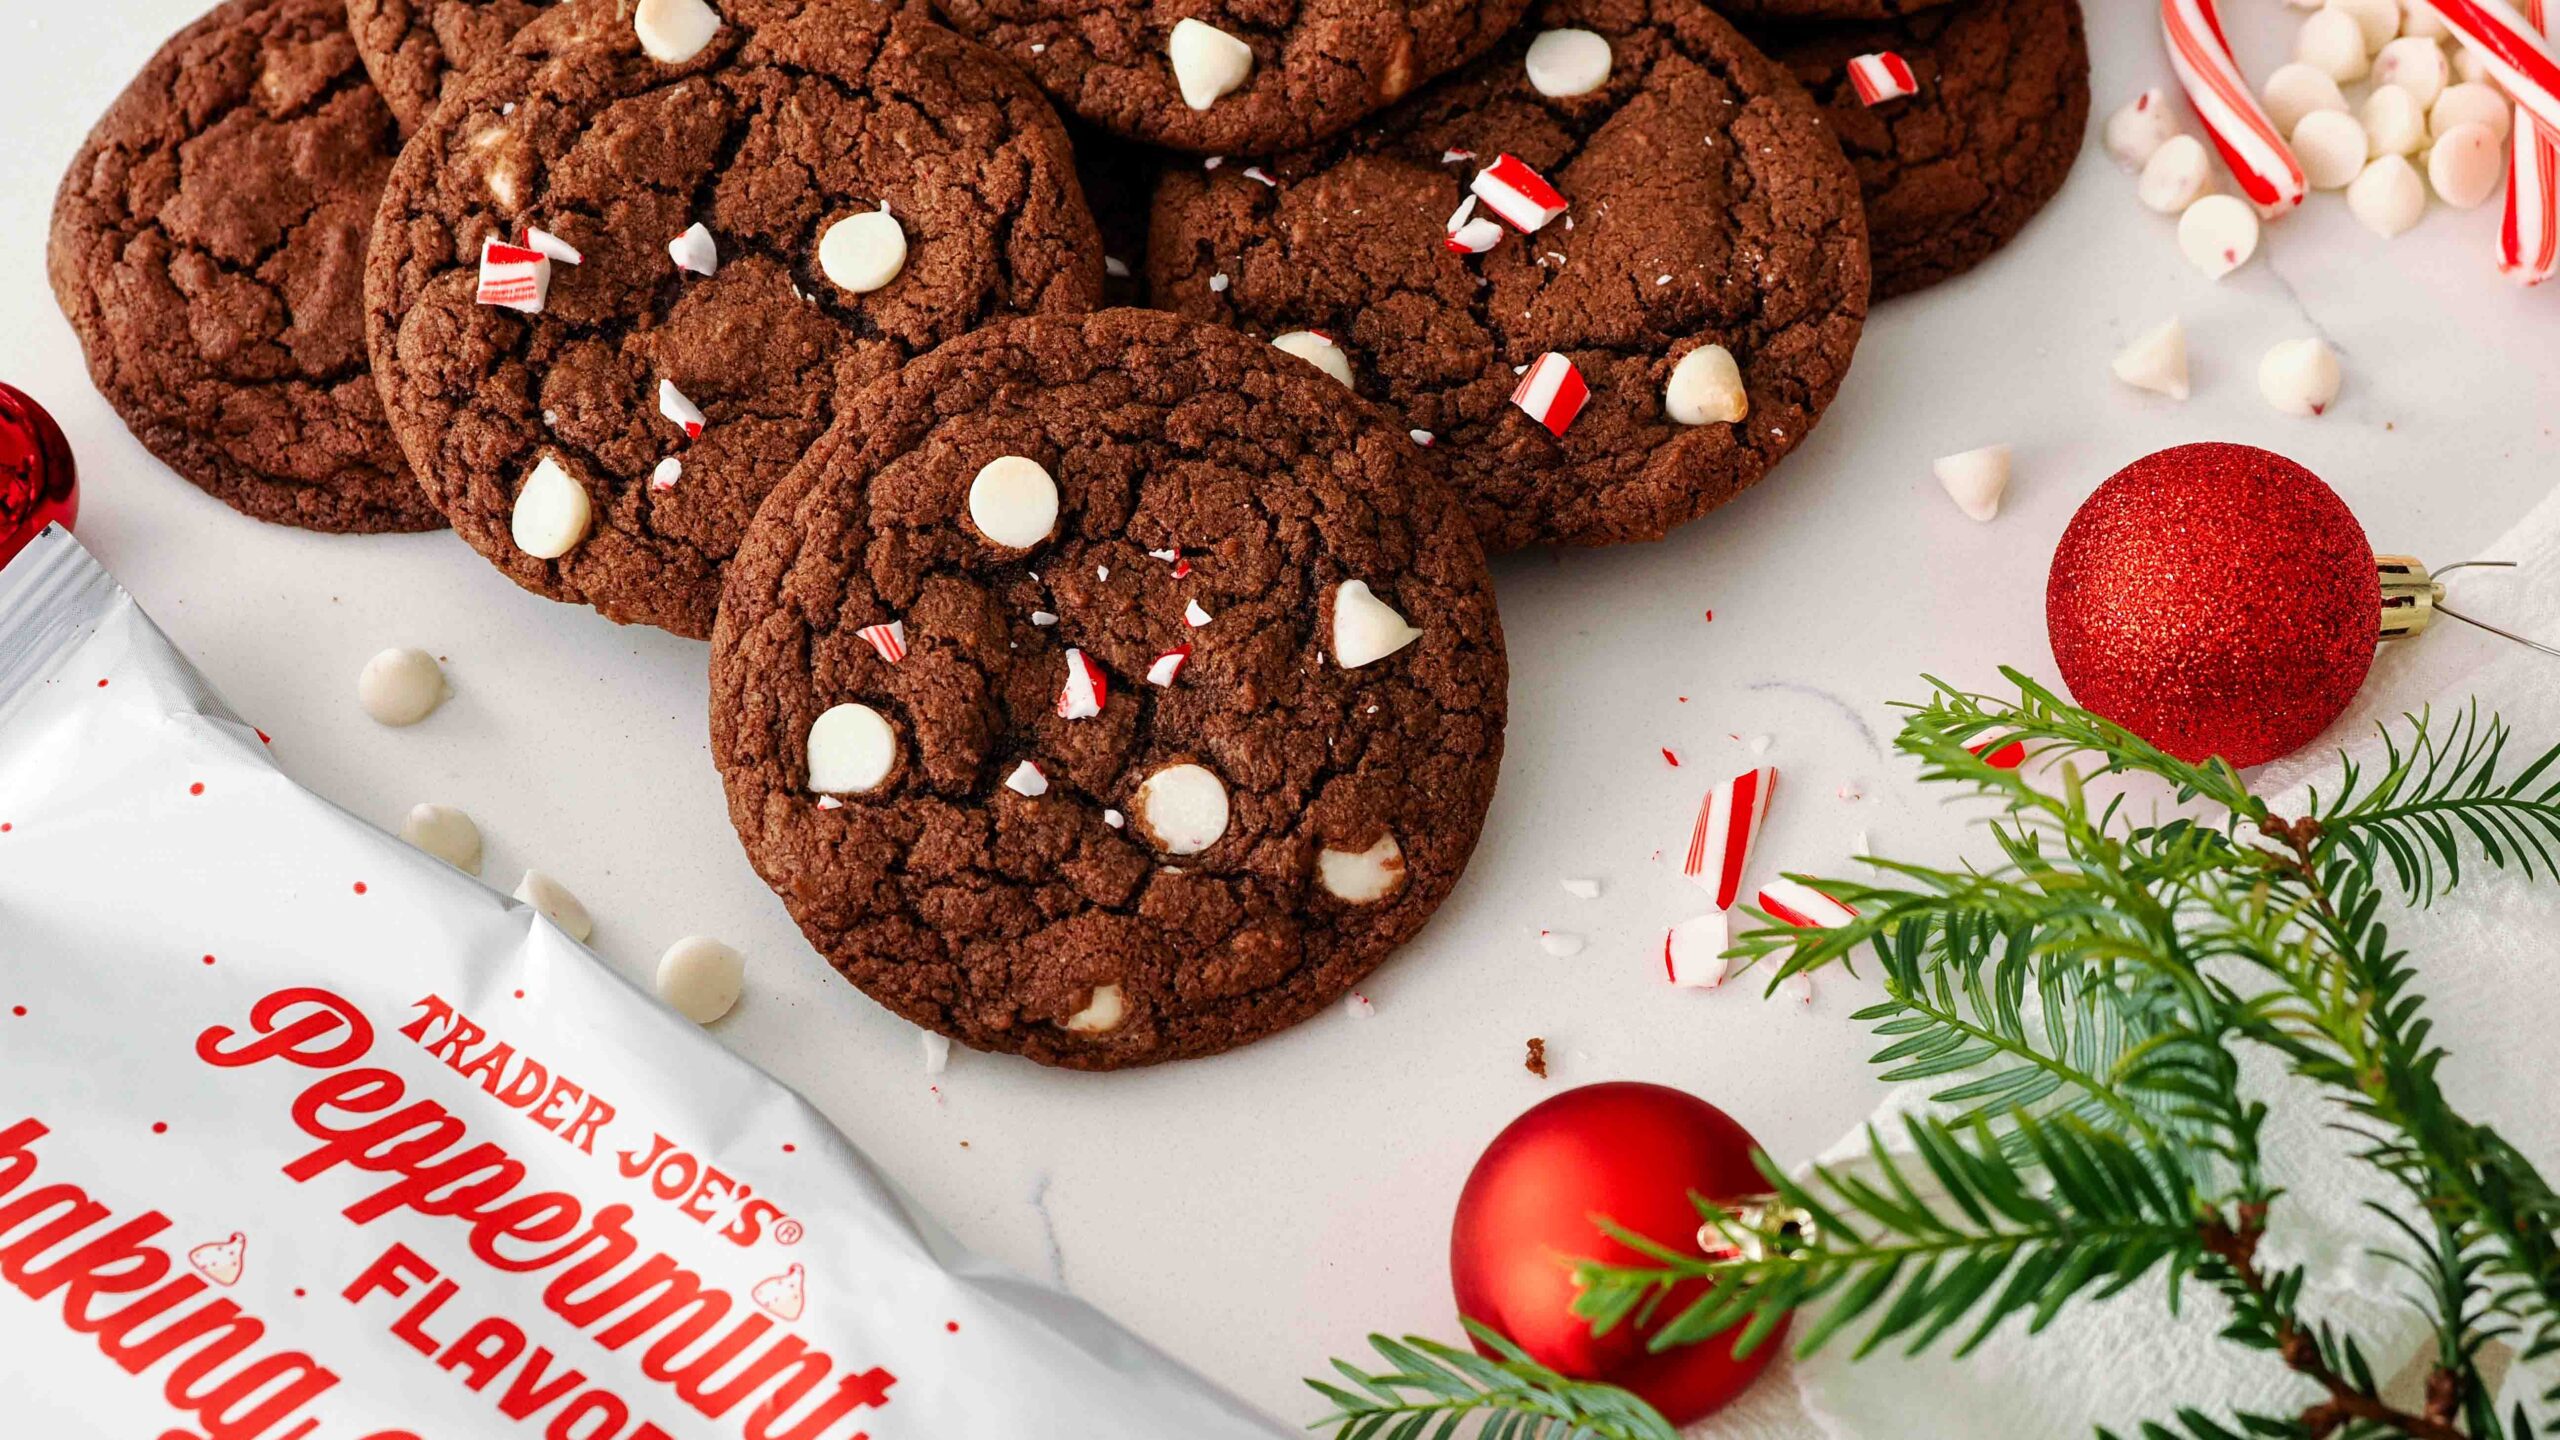 A pile of chocolate peppermint cookies near a bag of peppermint chips.